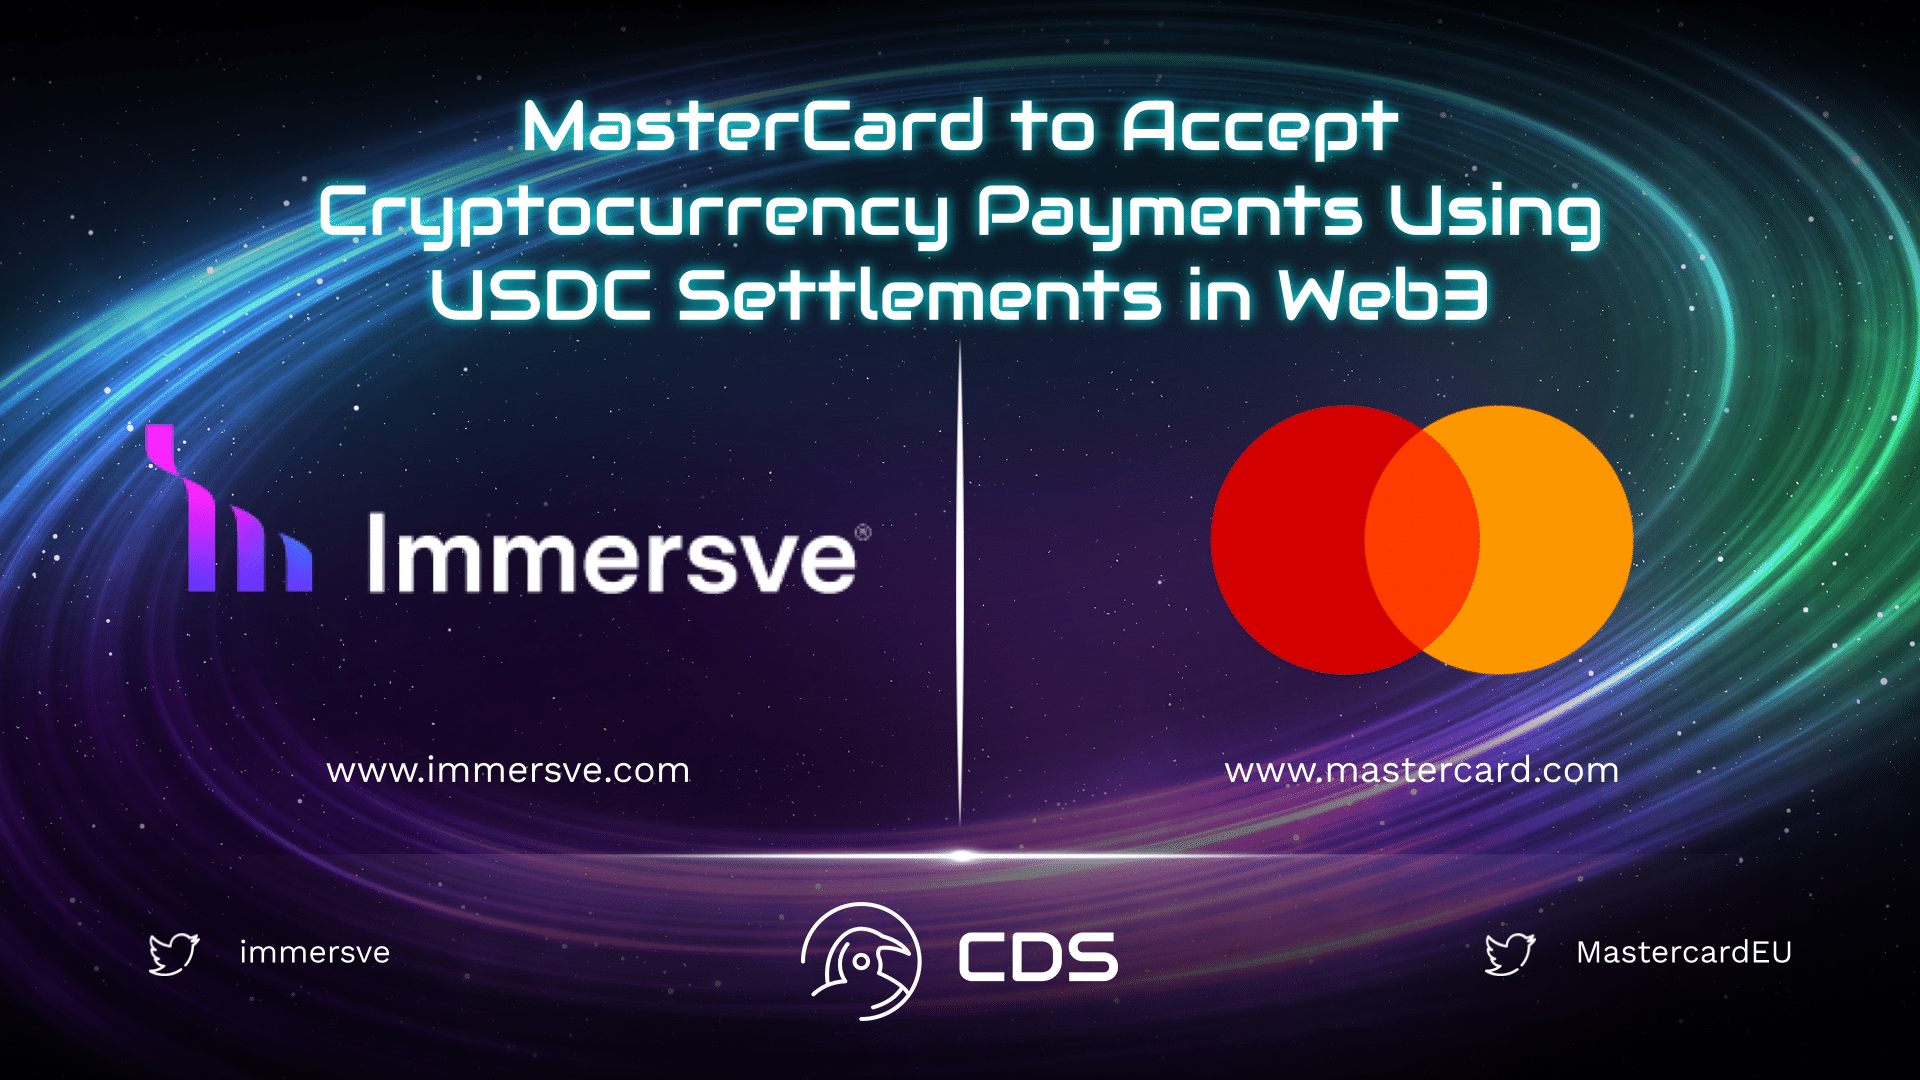 MasterCard to Accept Cryptocurrency Payments Using USDC Settlements in Web3